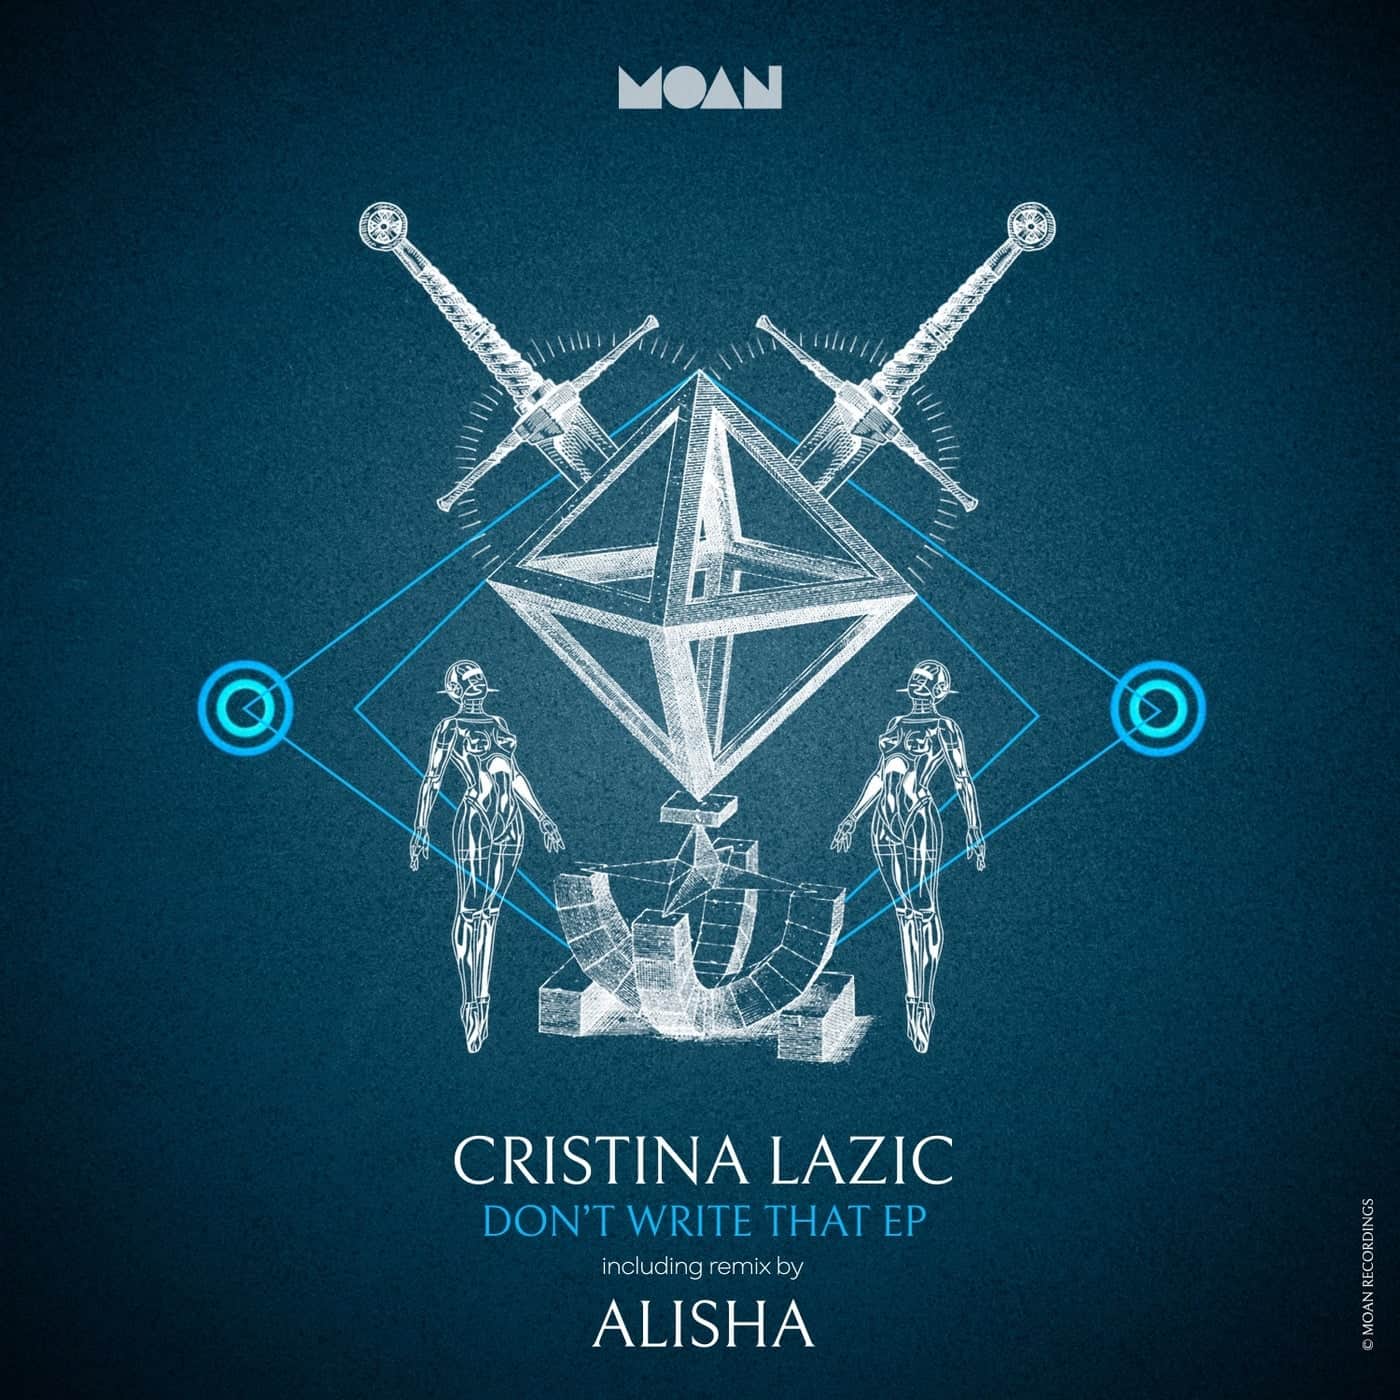 image cover: Cristina Lazic - Don't Write That EP on Moan